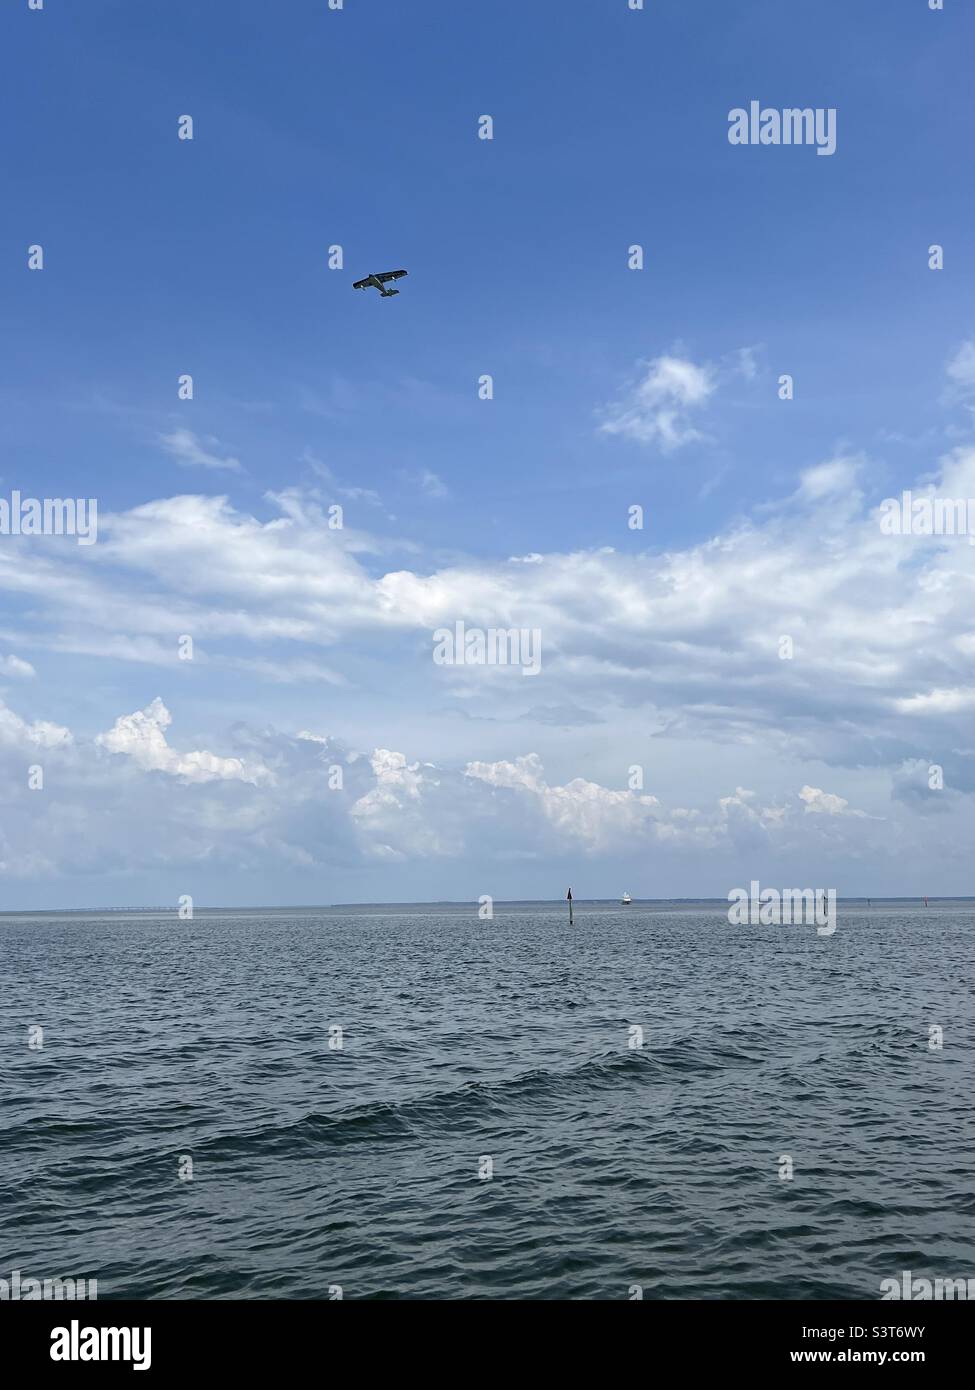 Seaplane flying over the Gulf of Mexico Stock Photo